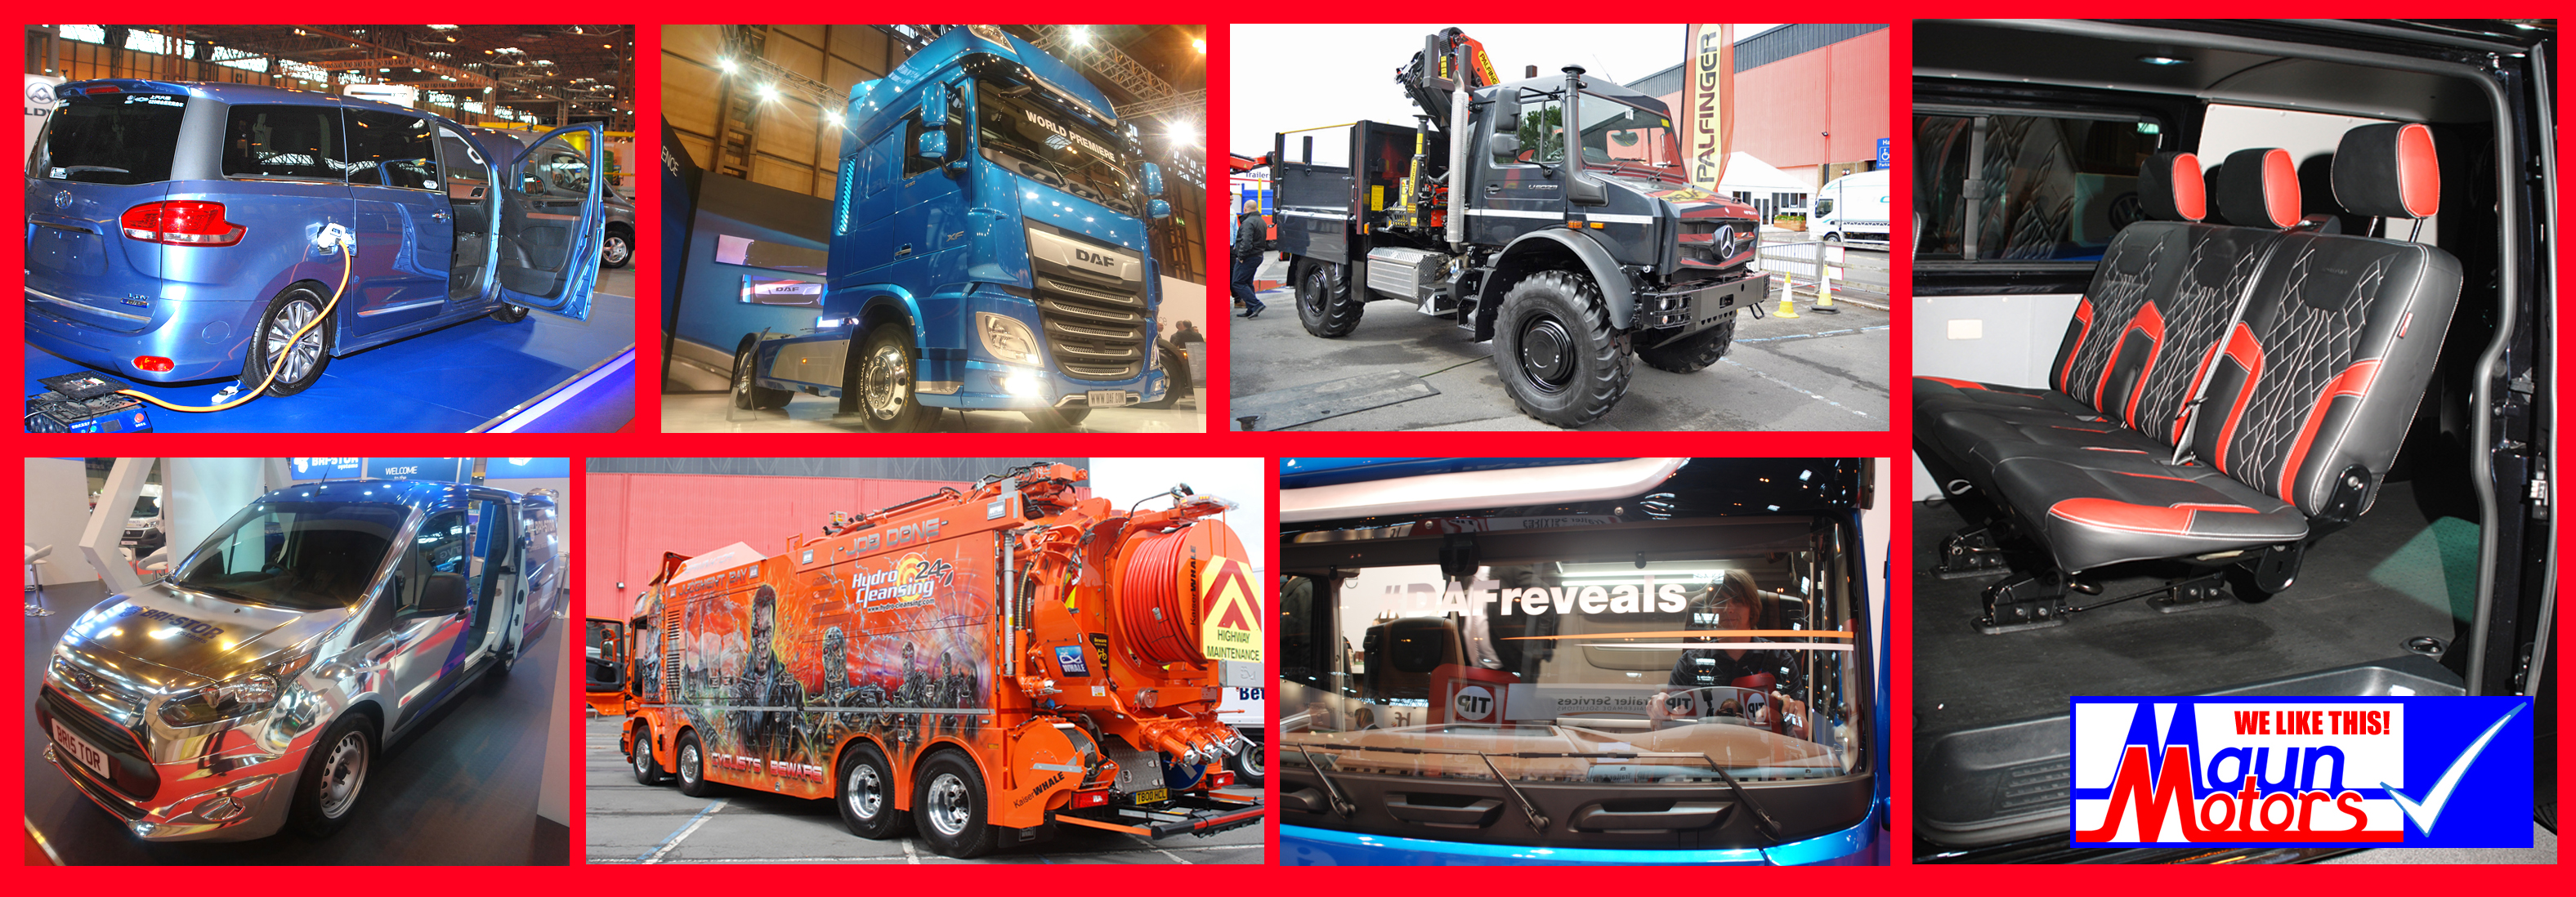 Various images from the CV Show at the NEC Birmingham